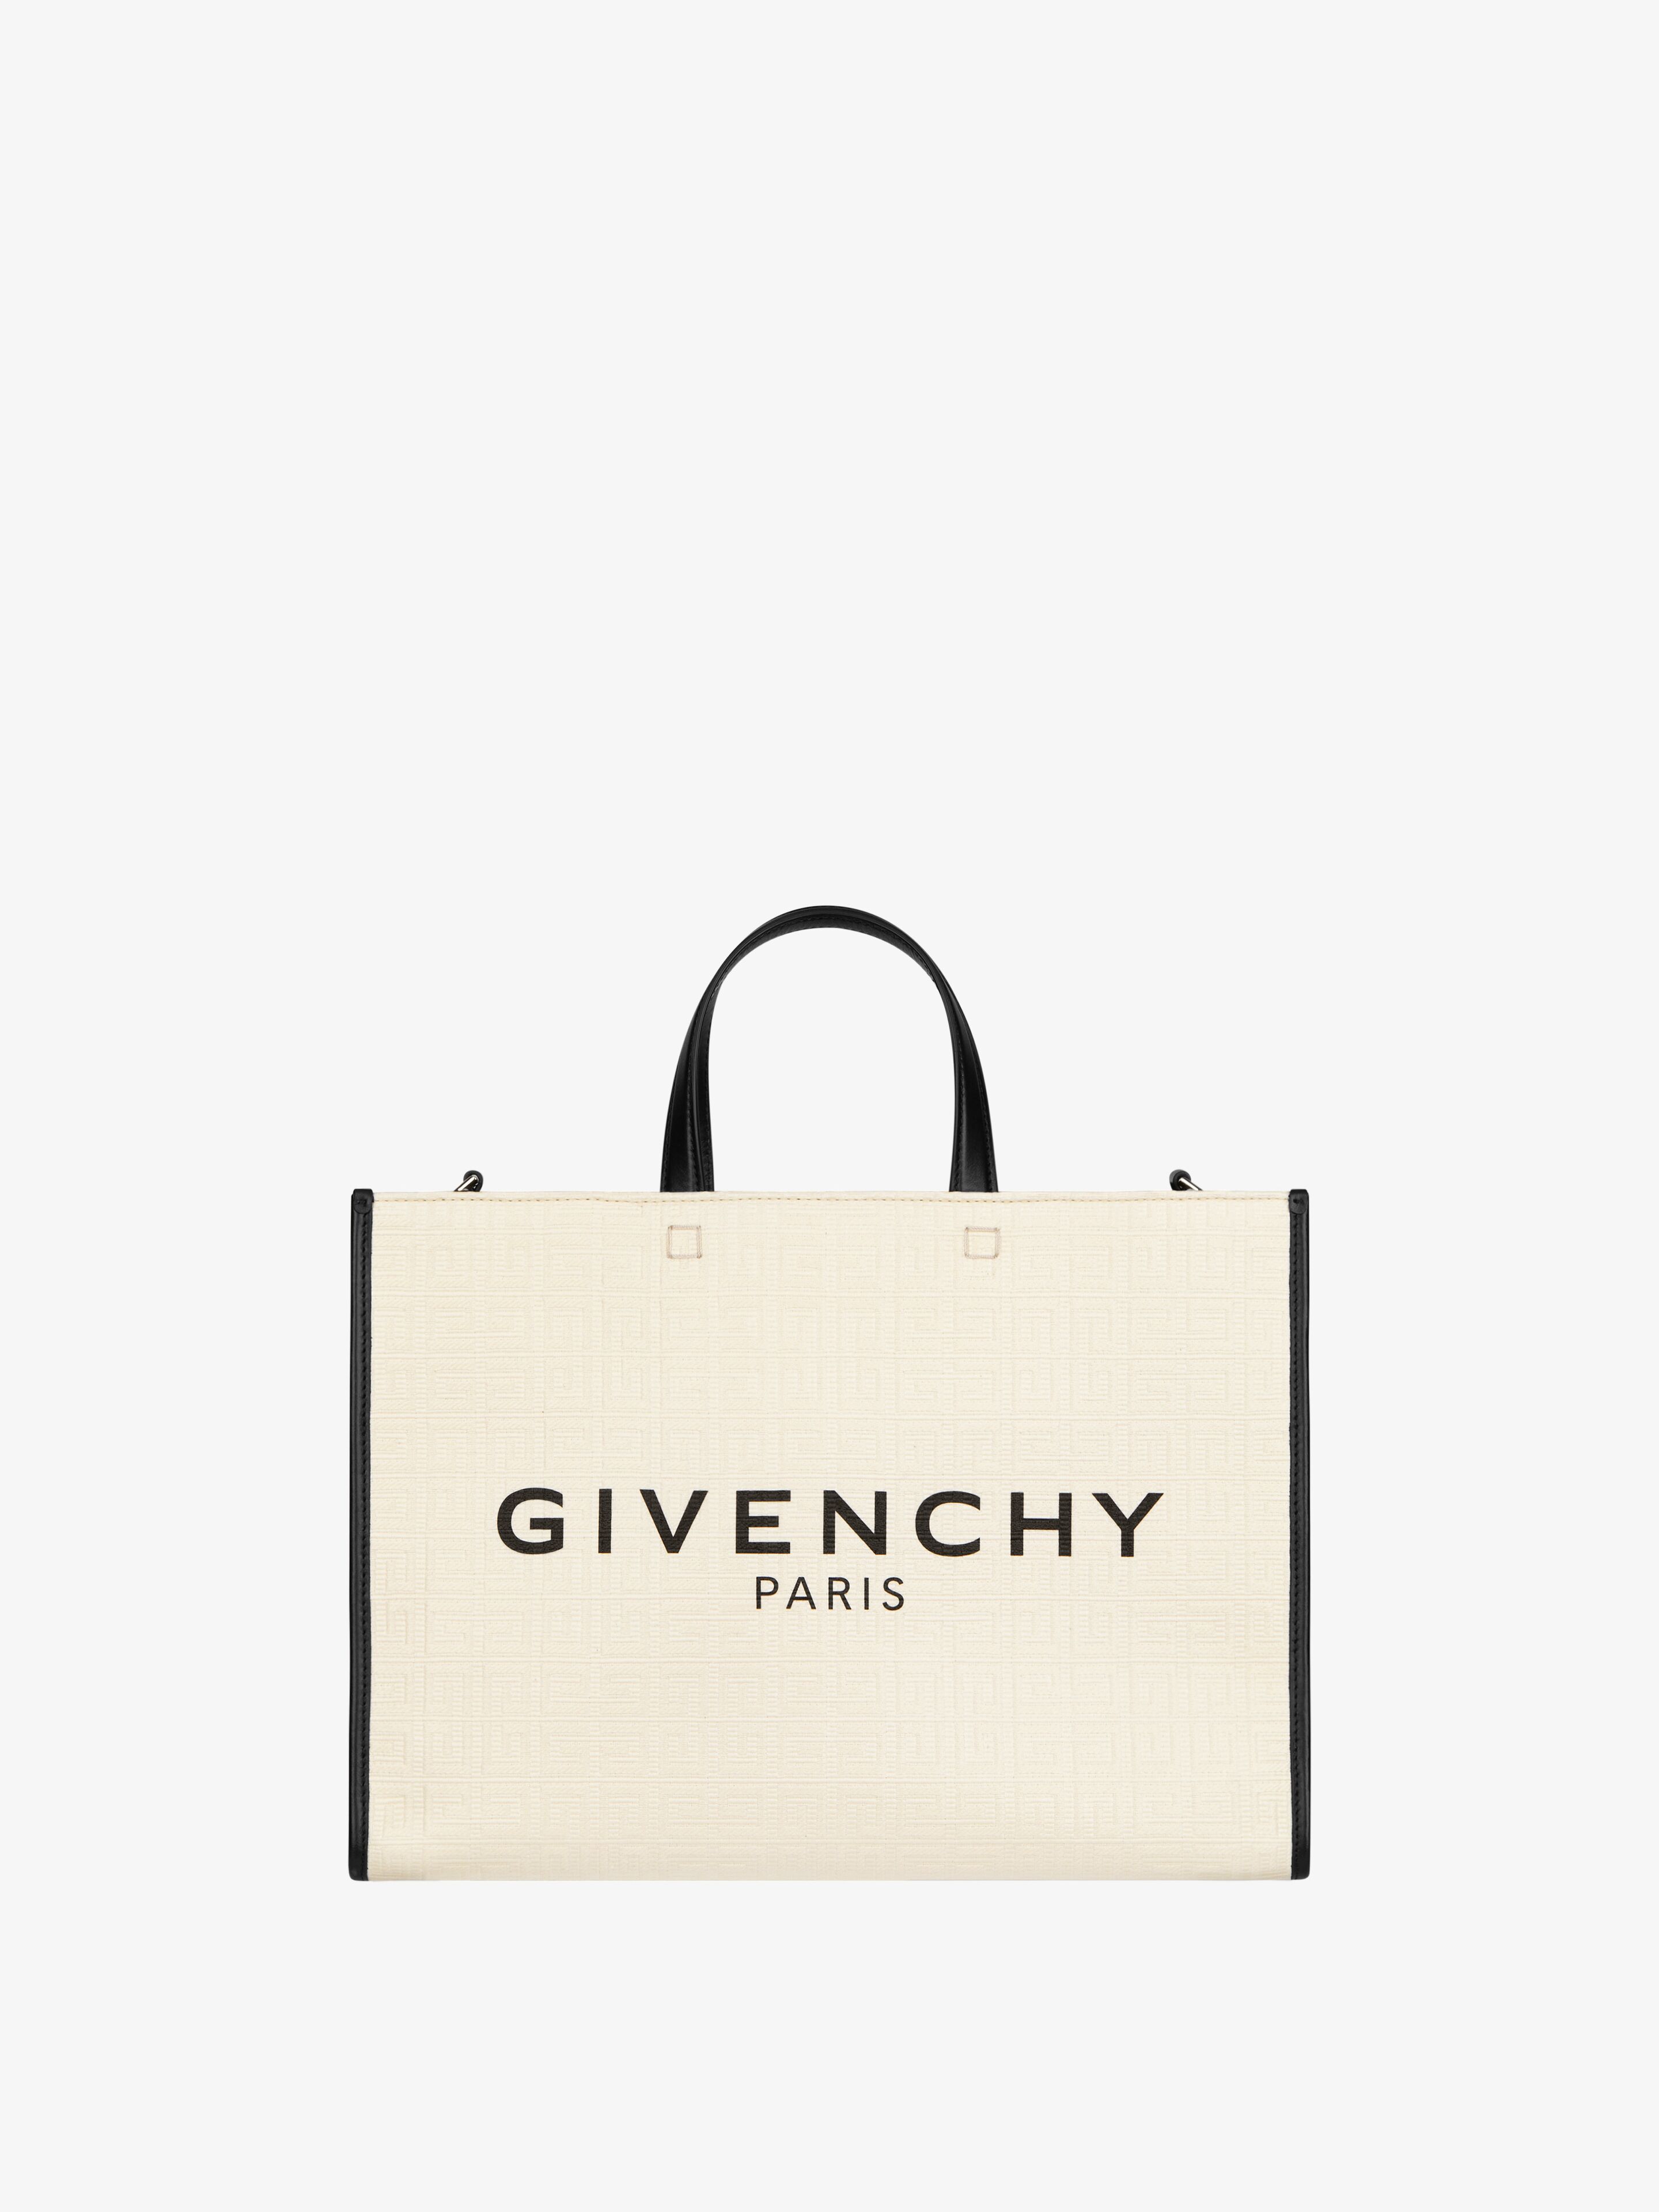 Givenchy Medium G-Tote Bag in Baby Blue